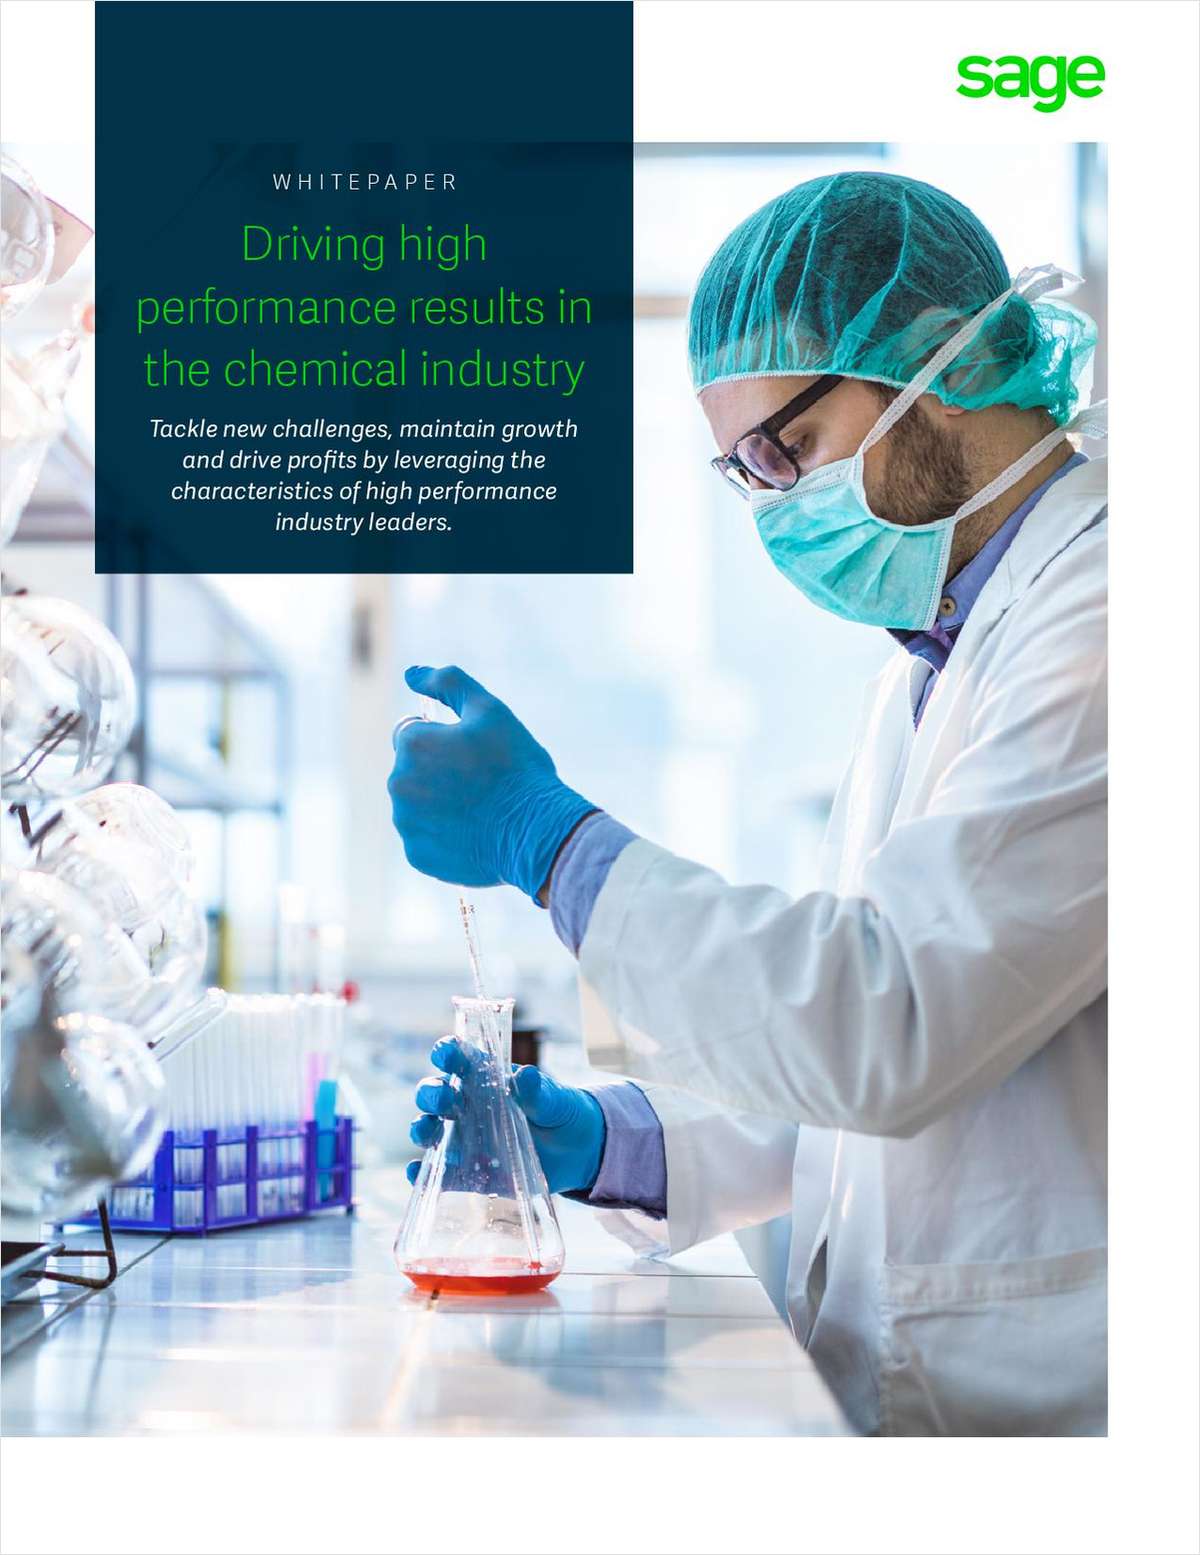 How to Drive High Performance Results in the Chemical Industry